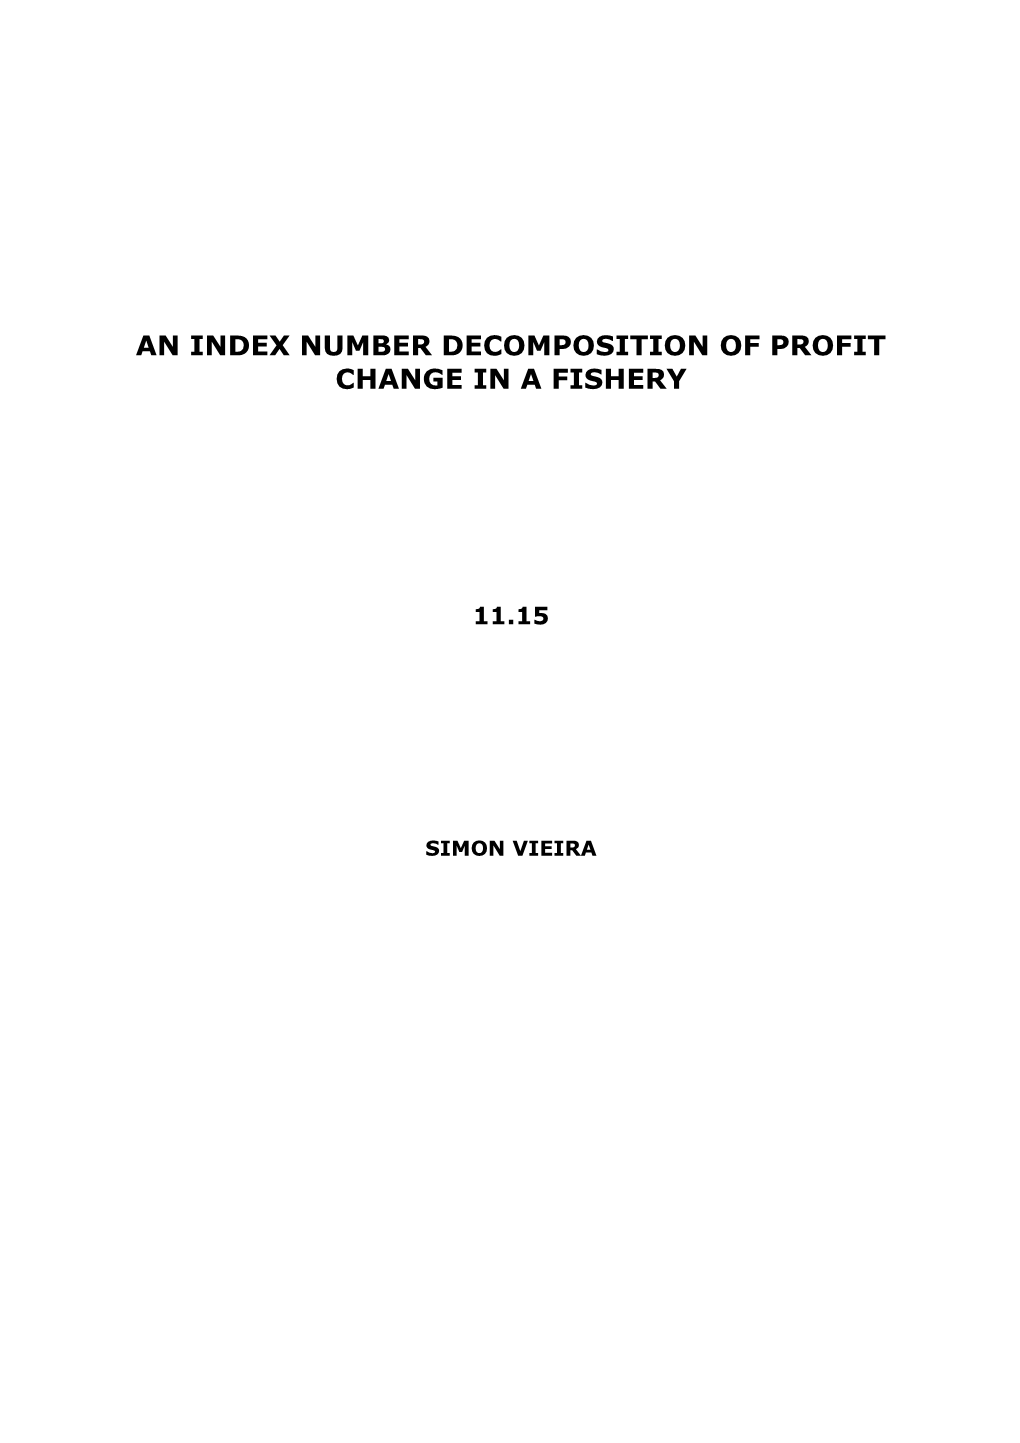 An Index Number Decomposition of Profit Change in a Fishery 11.15